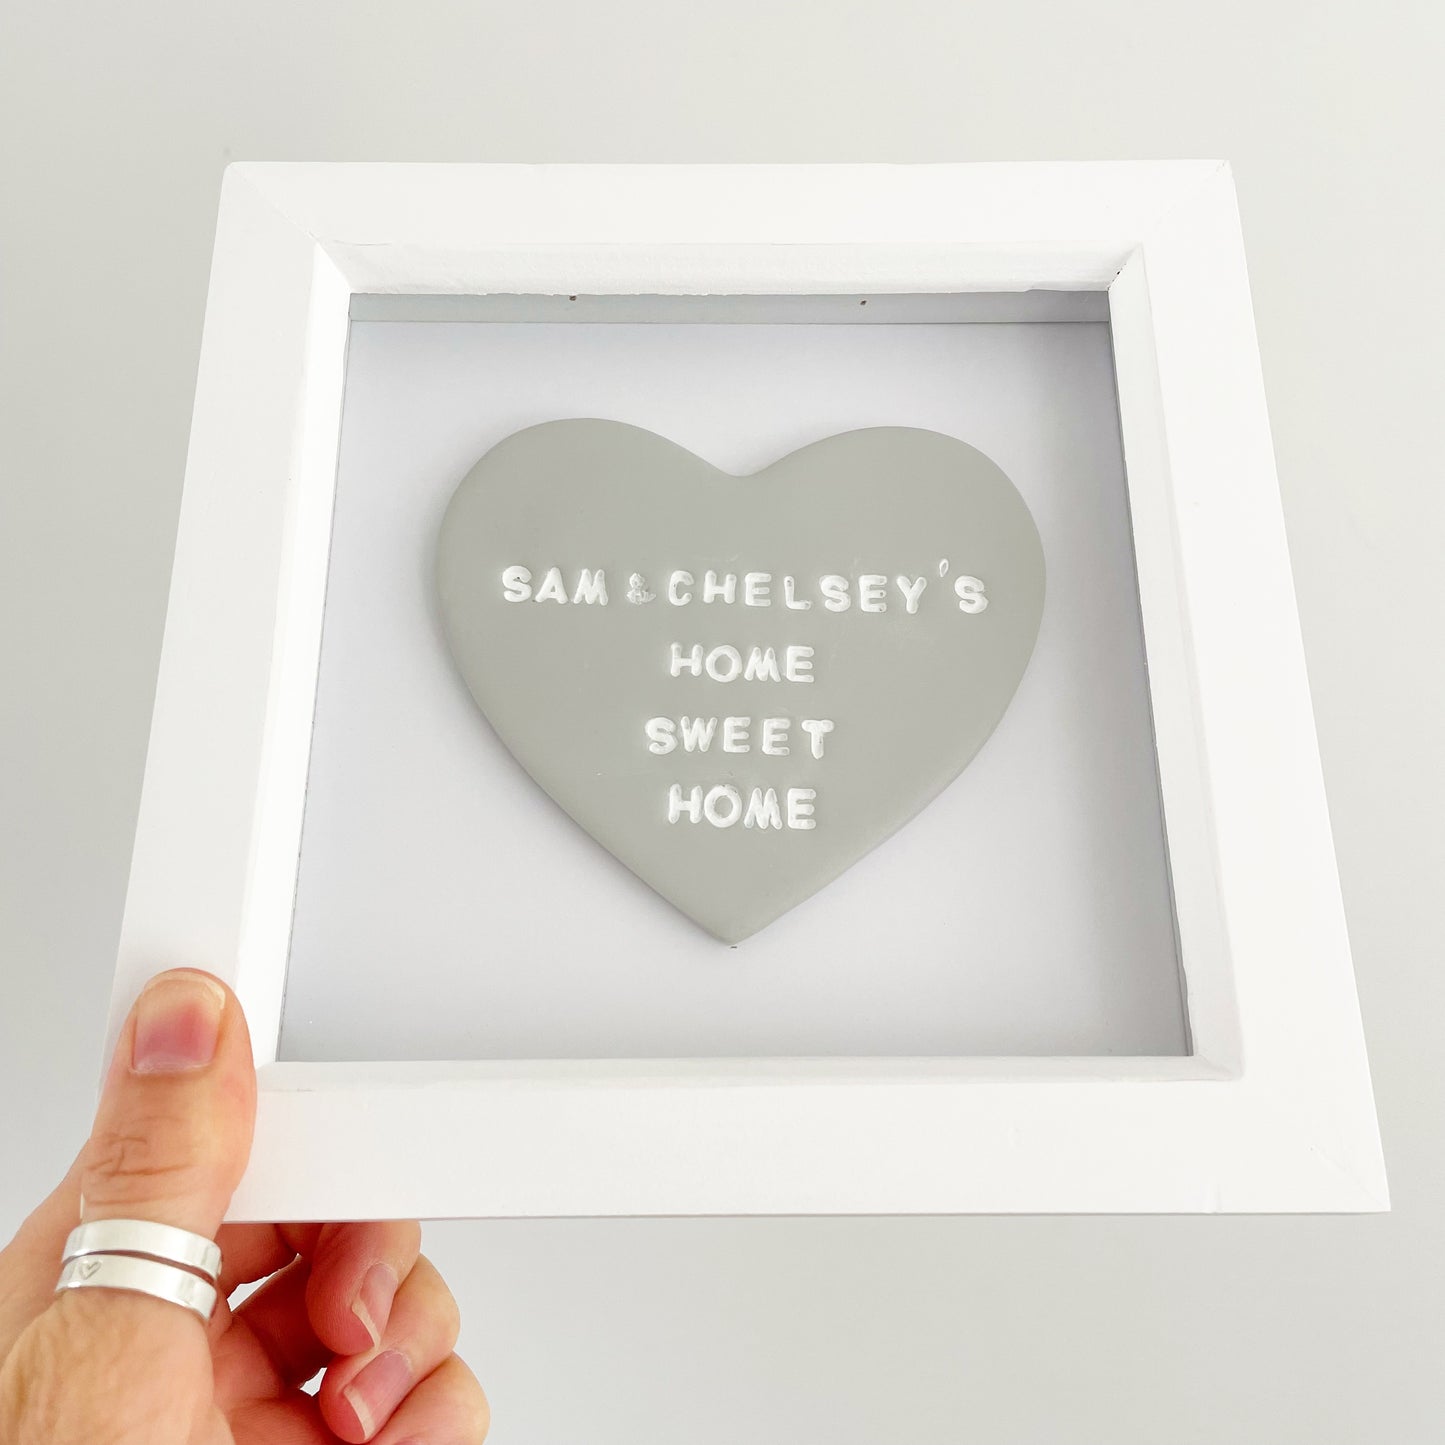 Personalised engagement gift, grey clay heart in a white box frame, the heart is personalised with SAM & CHELSEY'S HOME SWEET HOME